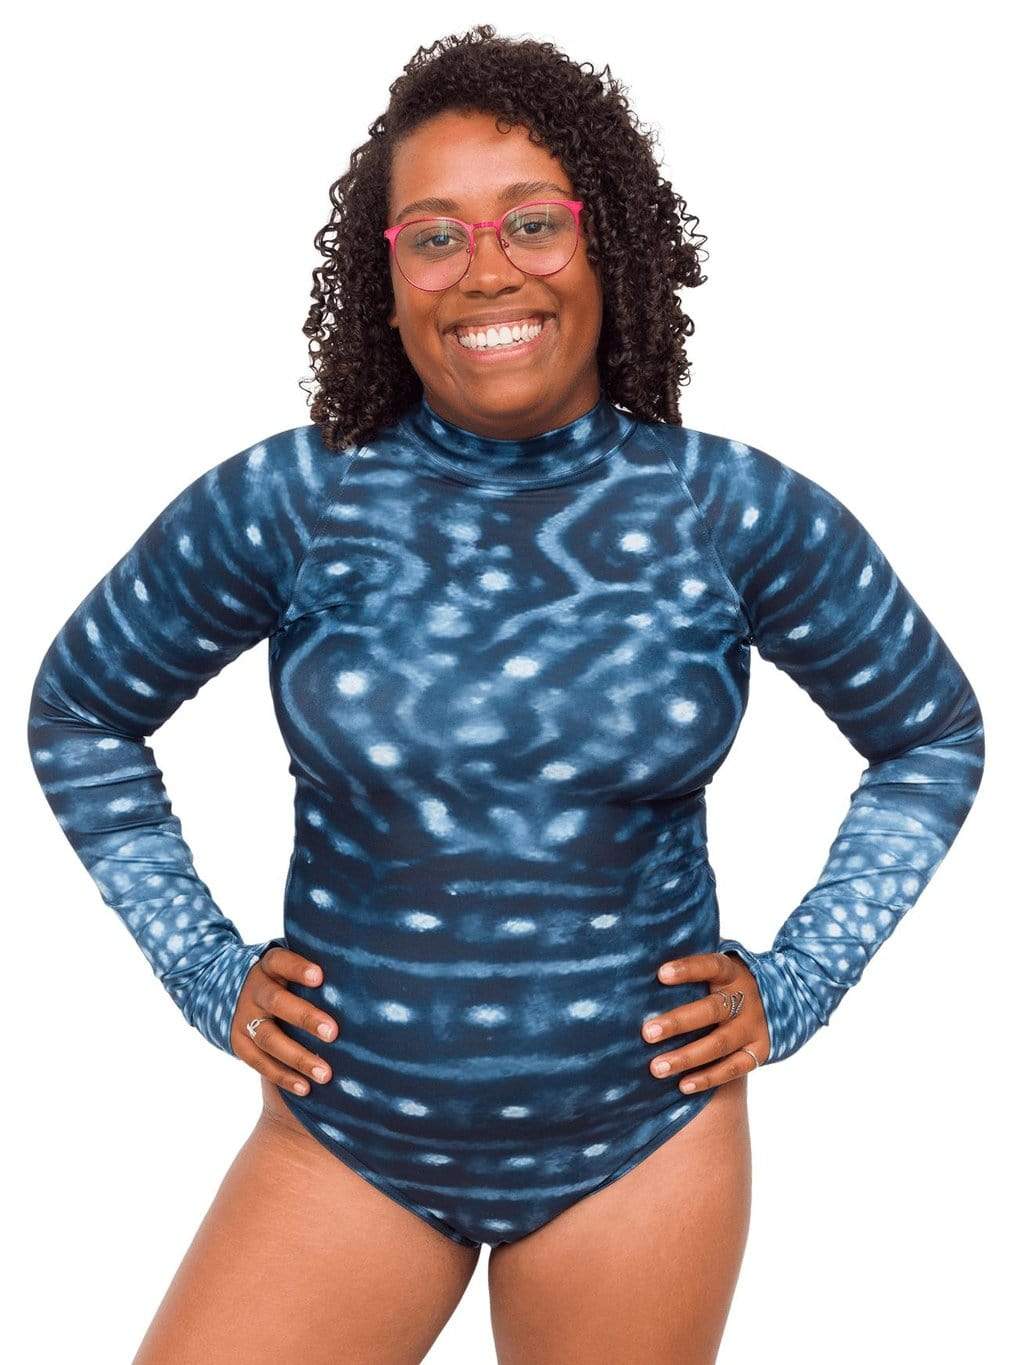 Model: Amani is the CFO of Minorities in Shark Sciences and a shark scientist. She is 5'3", 160 lbs, 36C and is wearing a M.